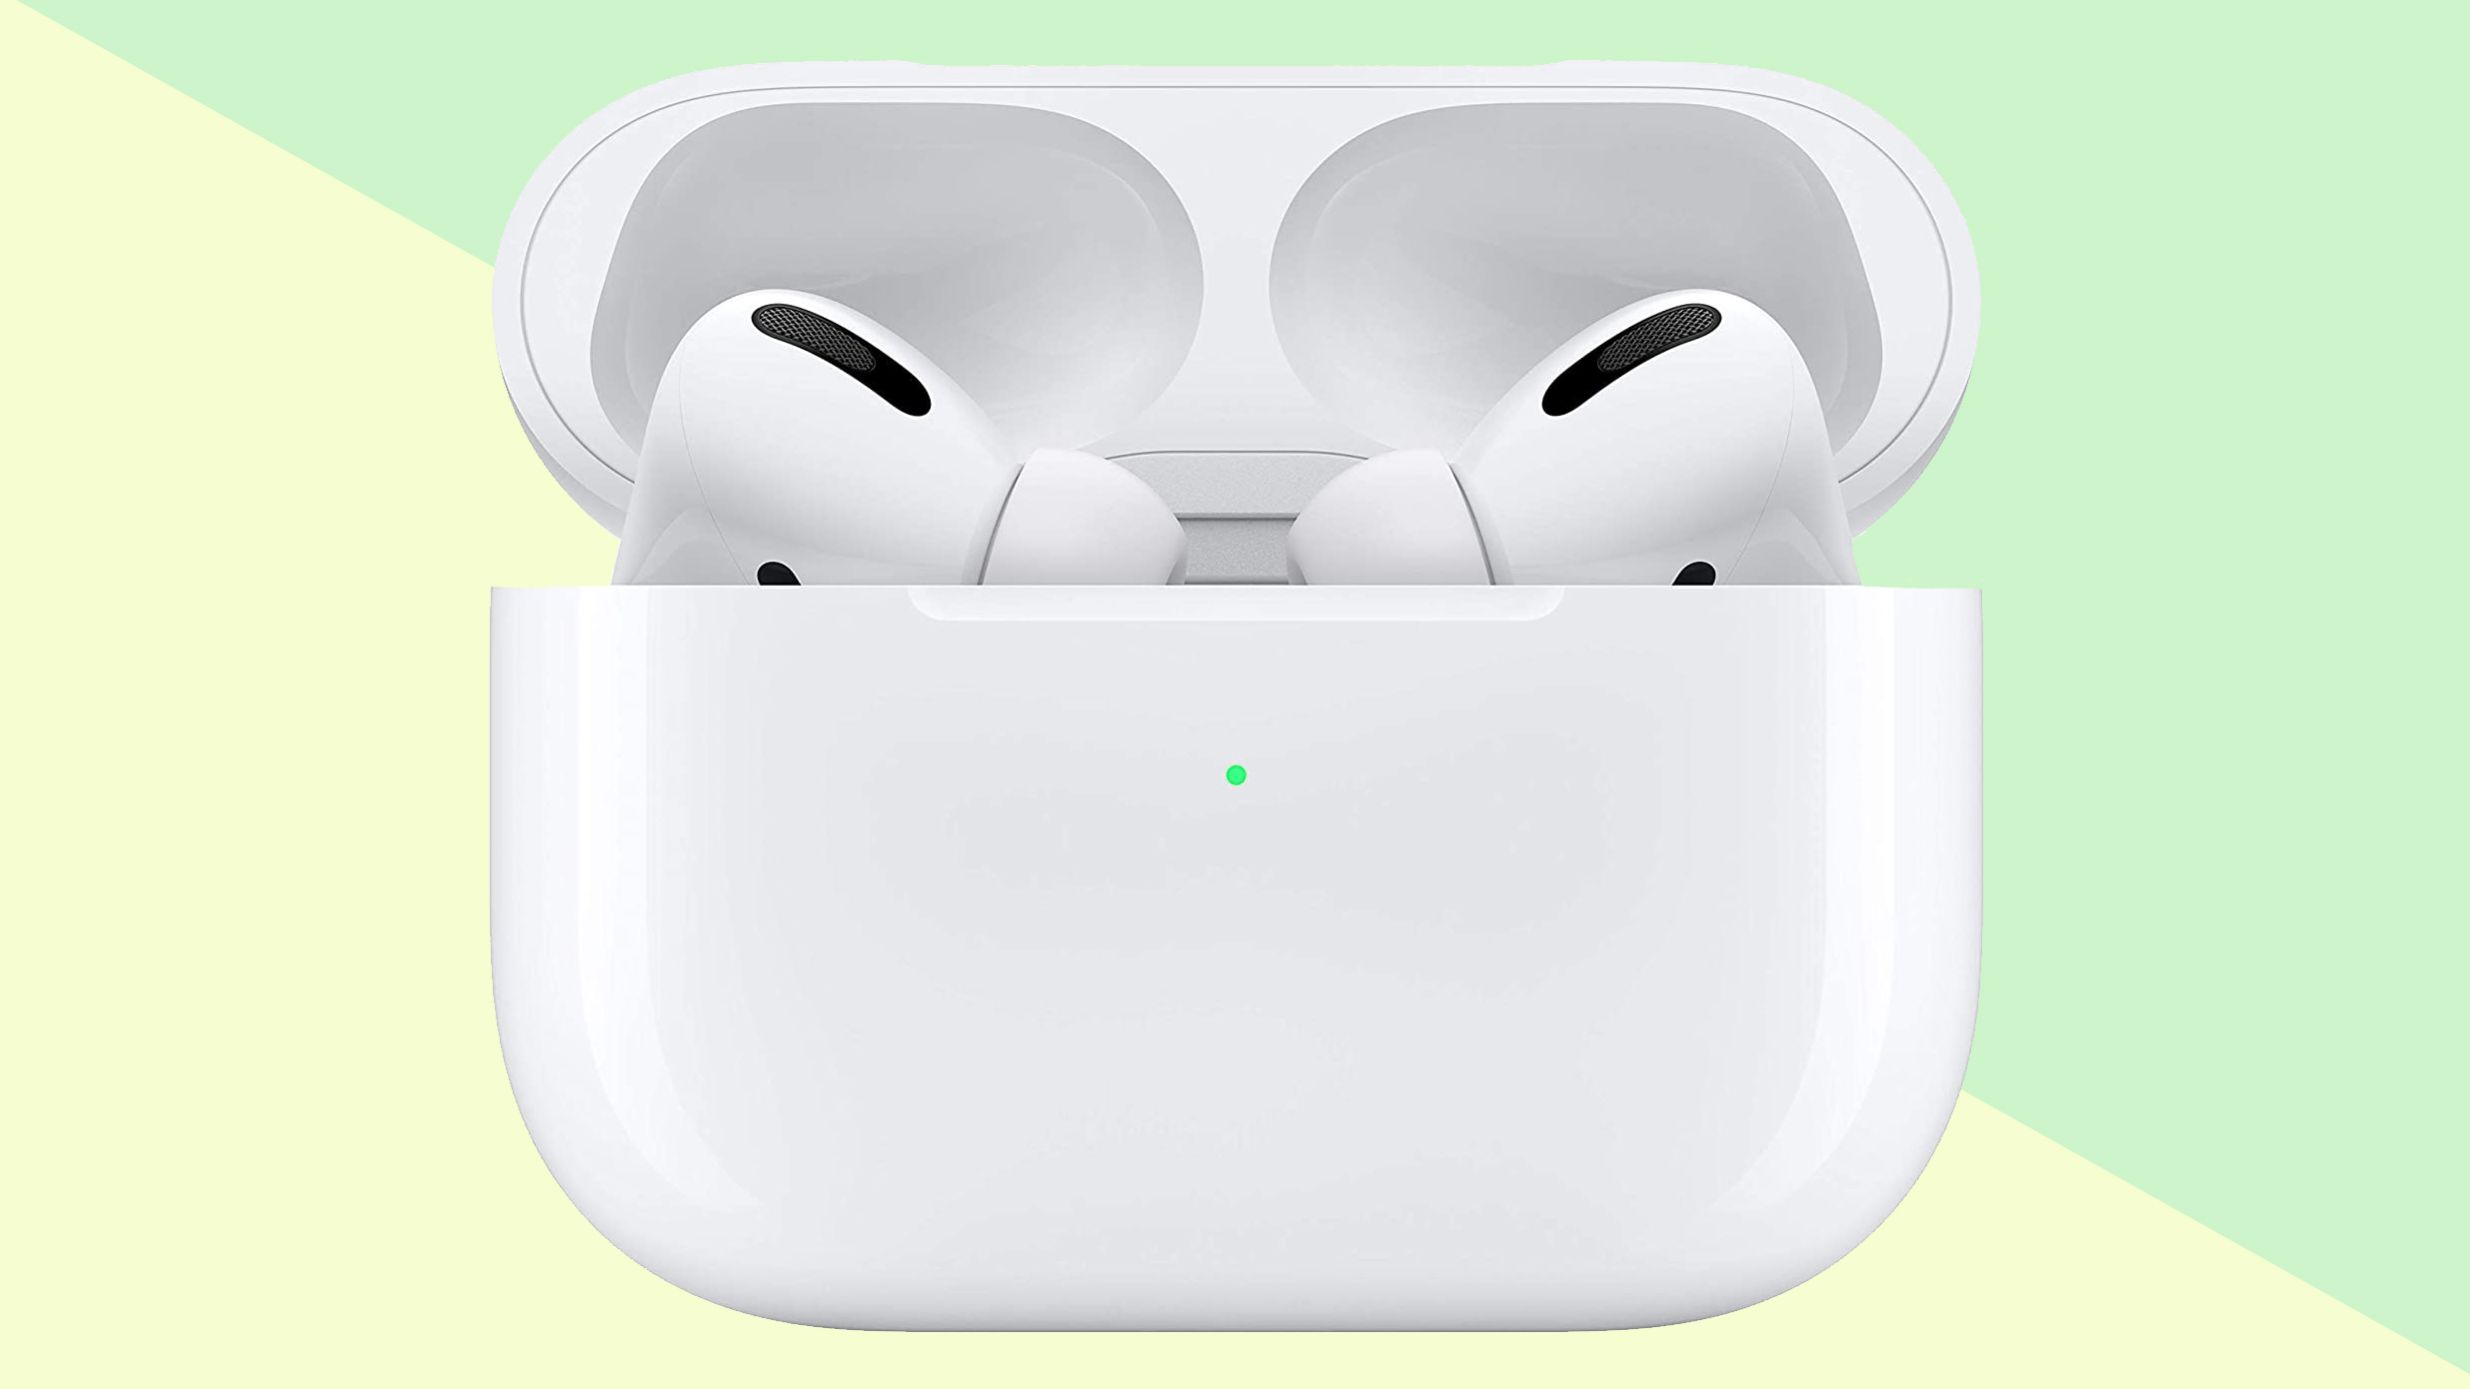 AirPods Max vs. AirPods Pro: Which AirPods are for you?